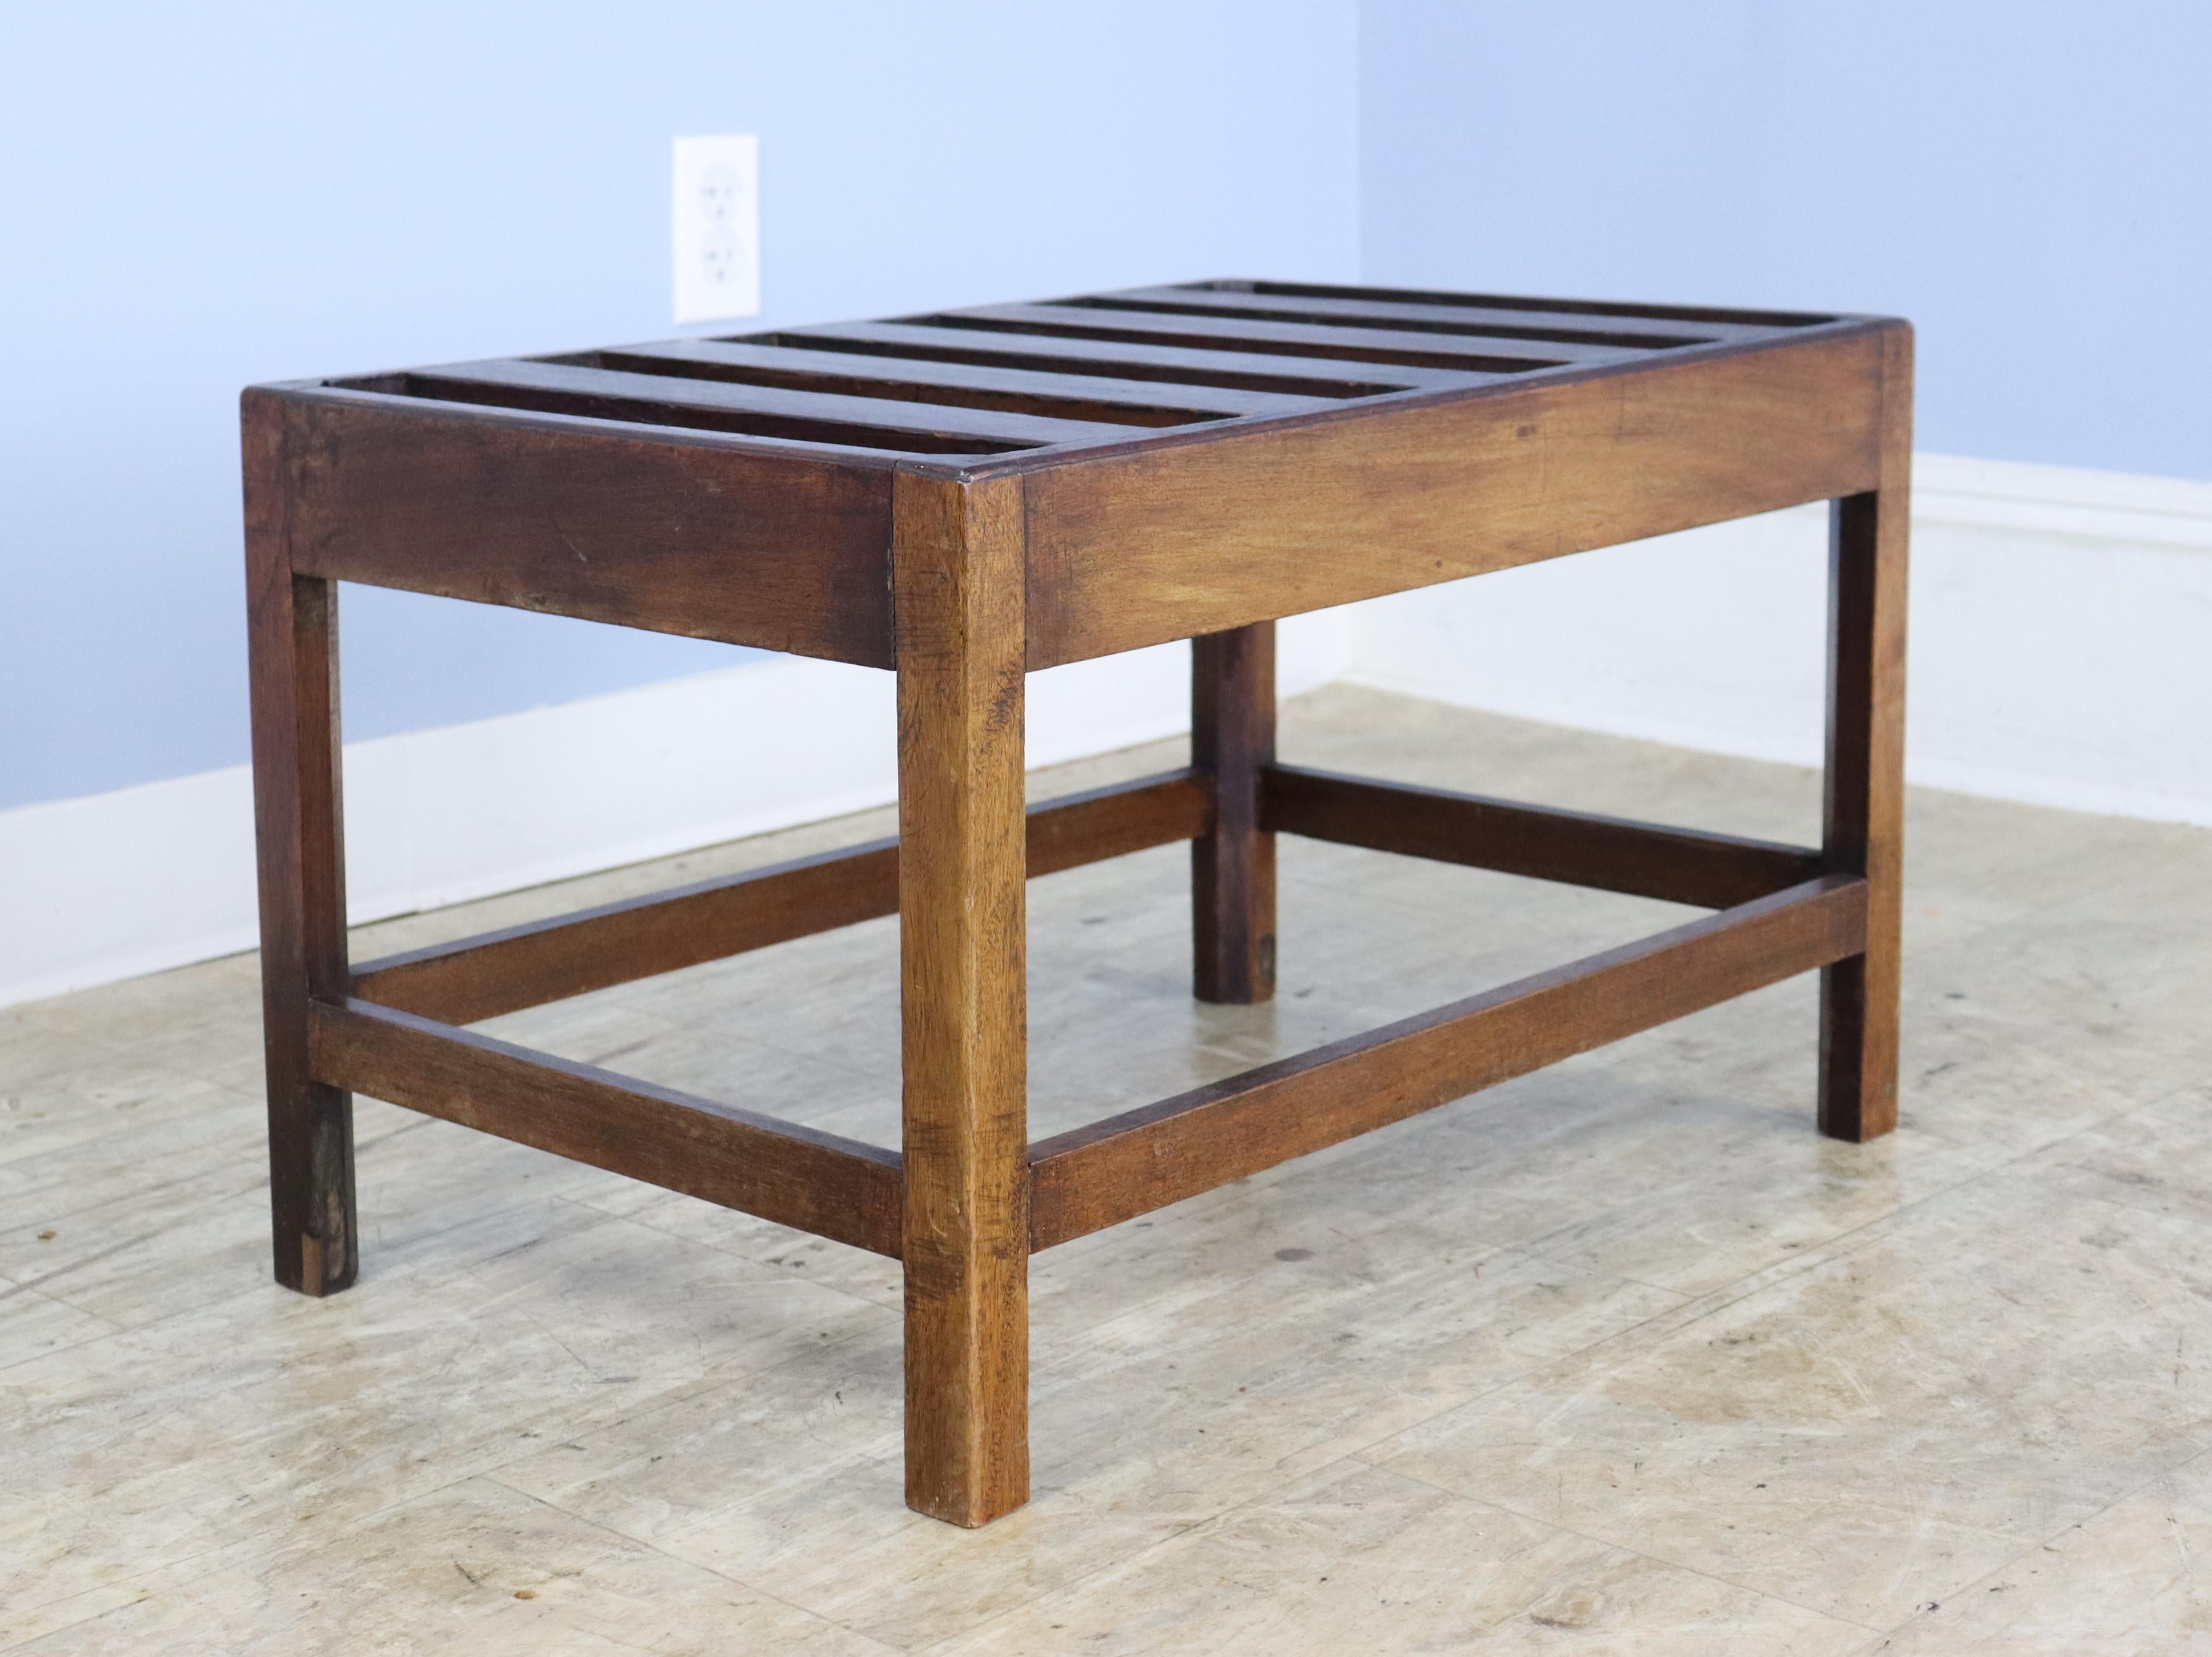 An elegant oak luggage rack for the guest room.  Your guests deserve it!